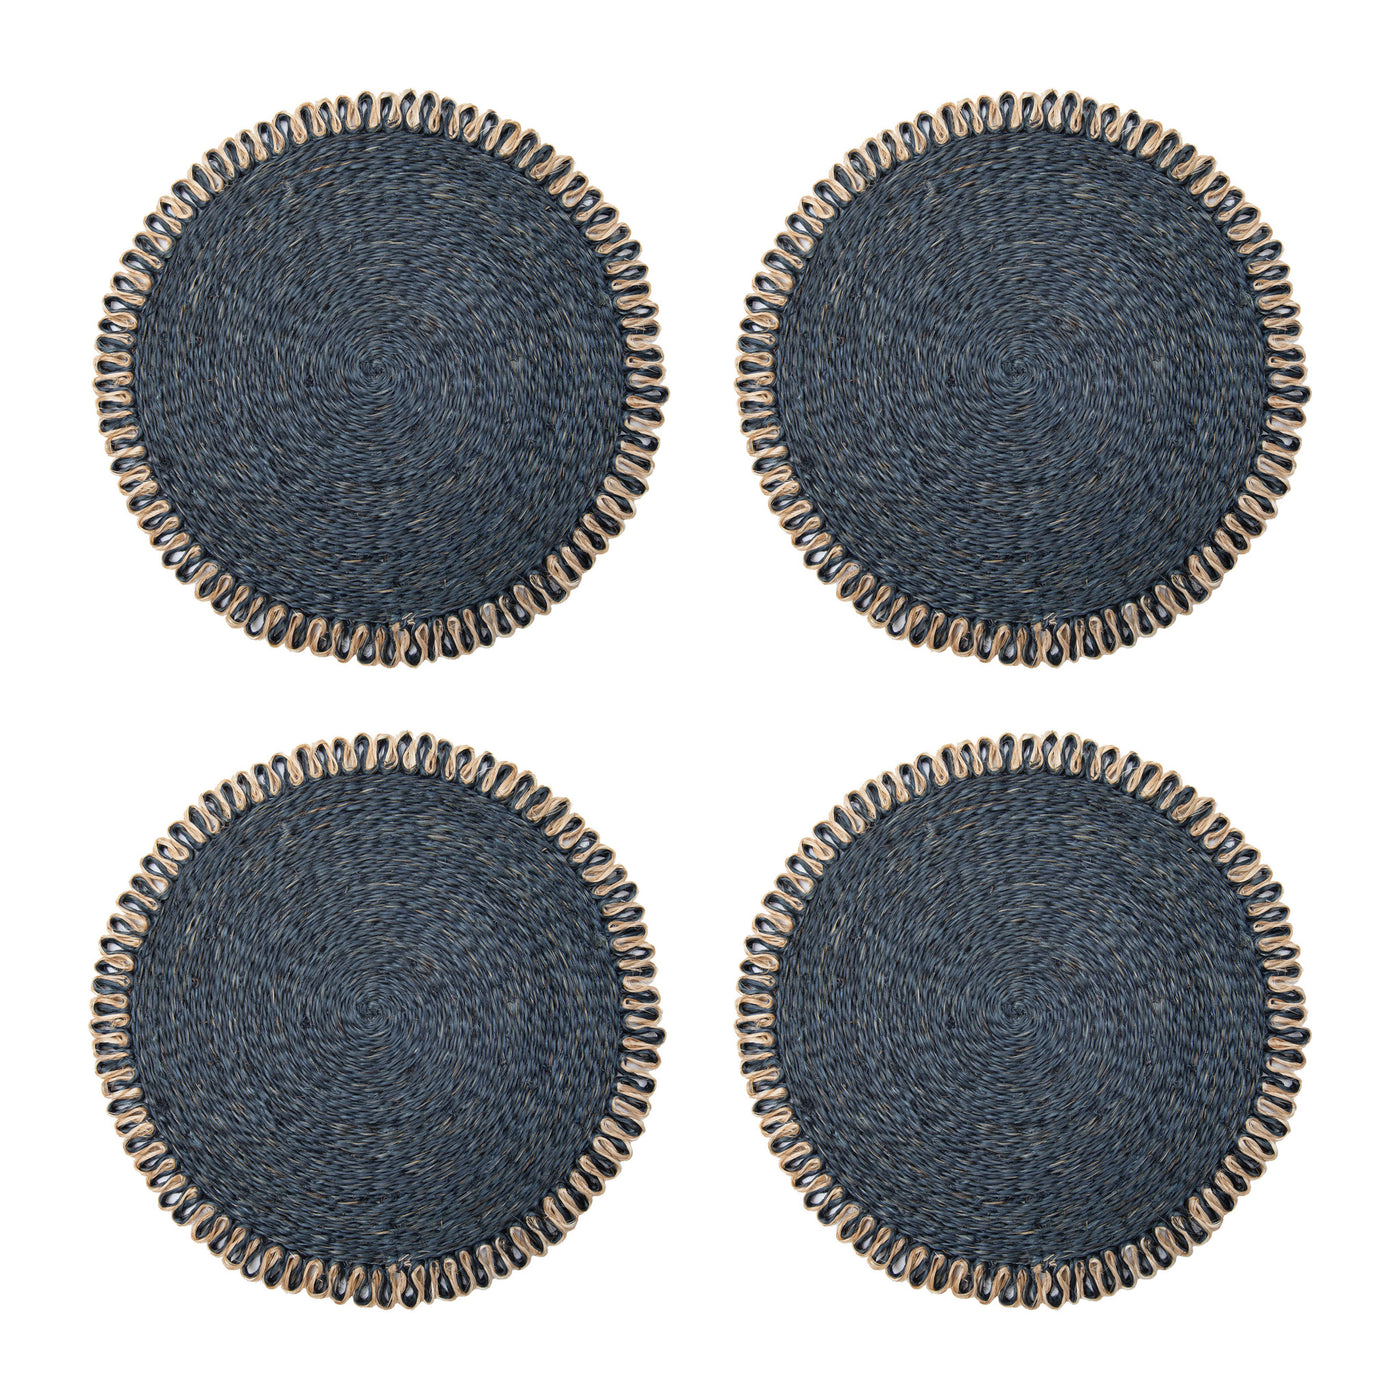 Loopy Abaca Navy & Natural 15" Round - Set of 4